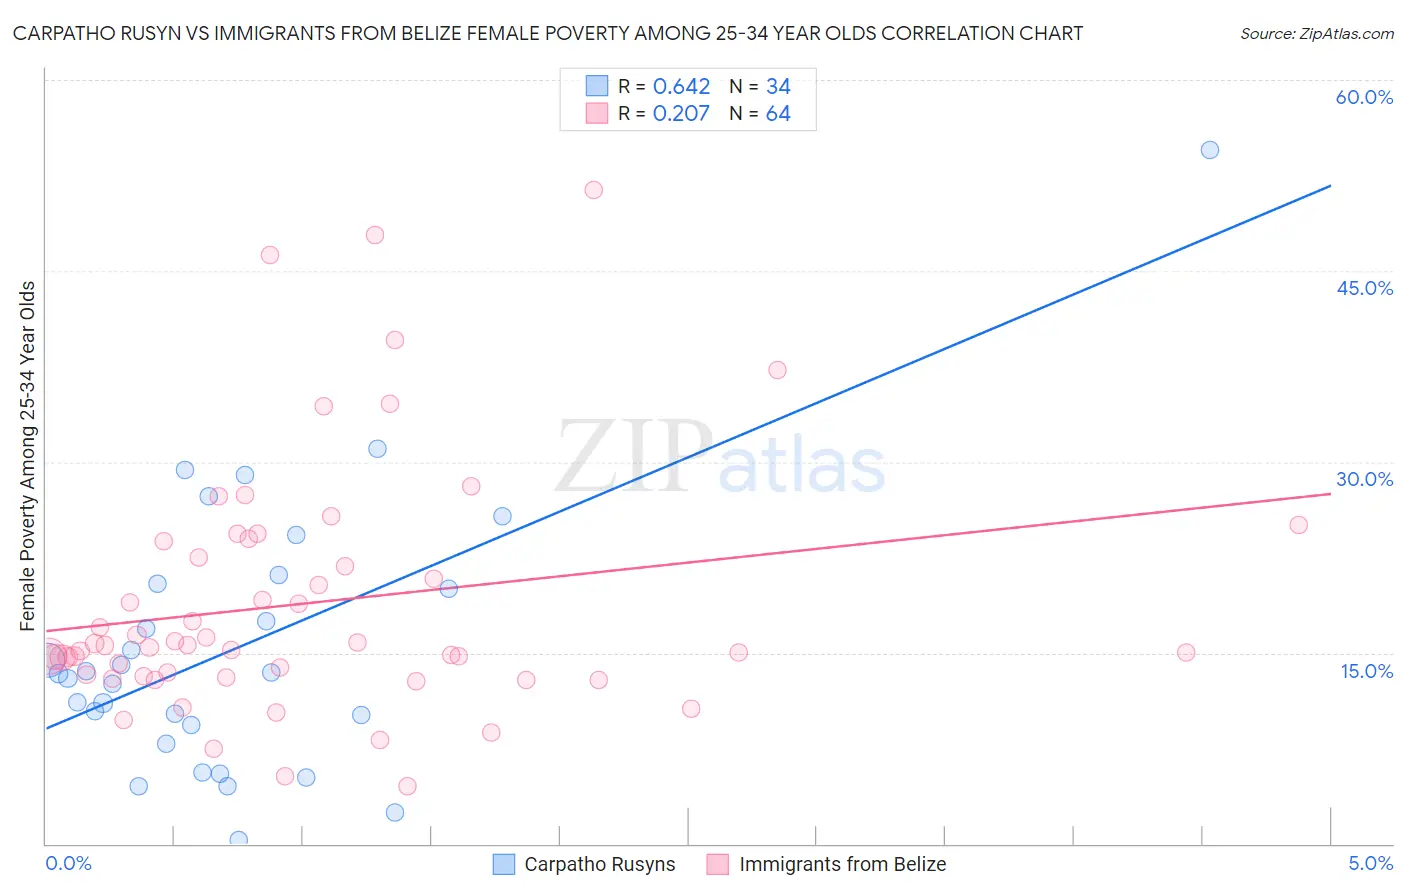 Carpatho Rusyn vs Immigrants from Belize Female Poverty Among 25-34 Year Olds